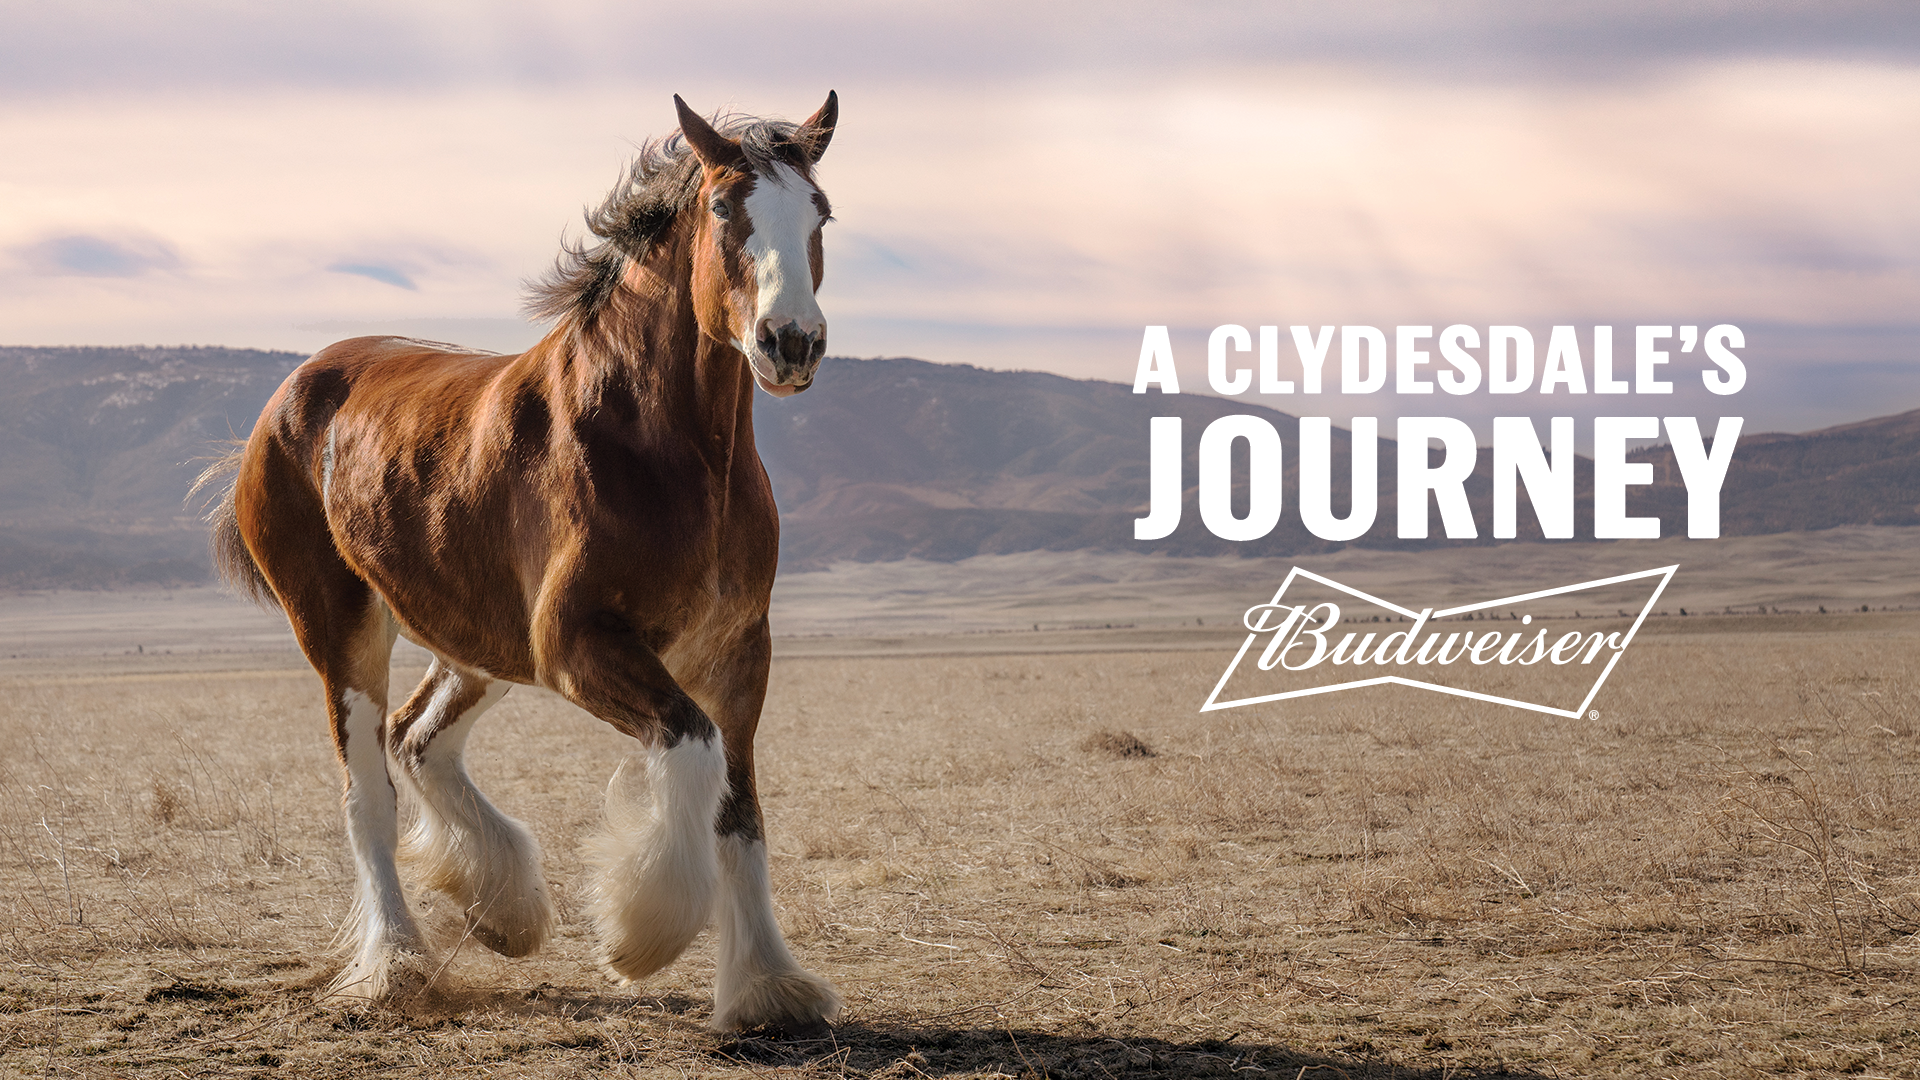 Clydesdales give hope in Budweiser return